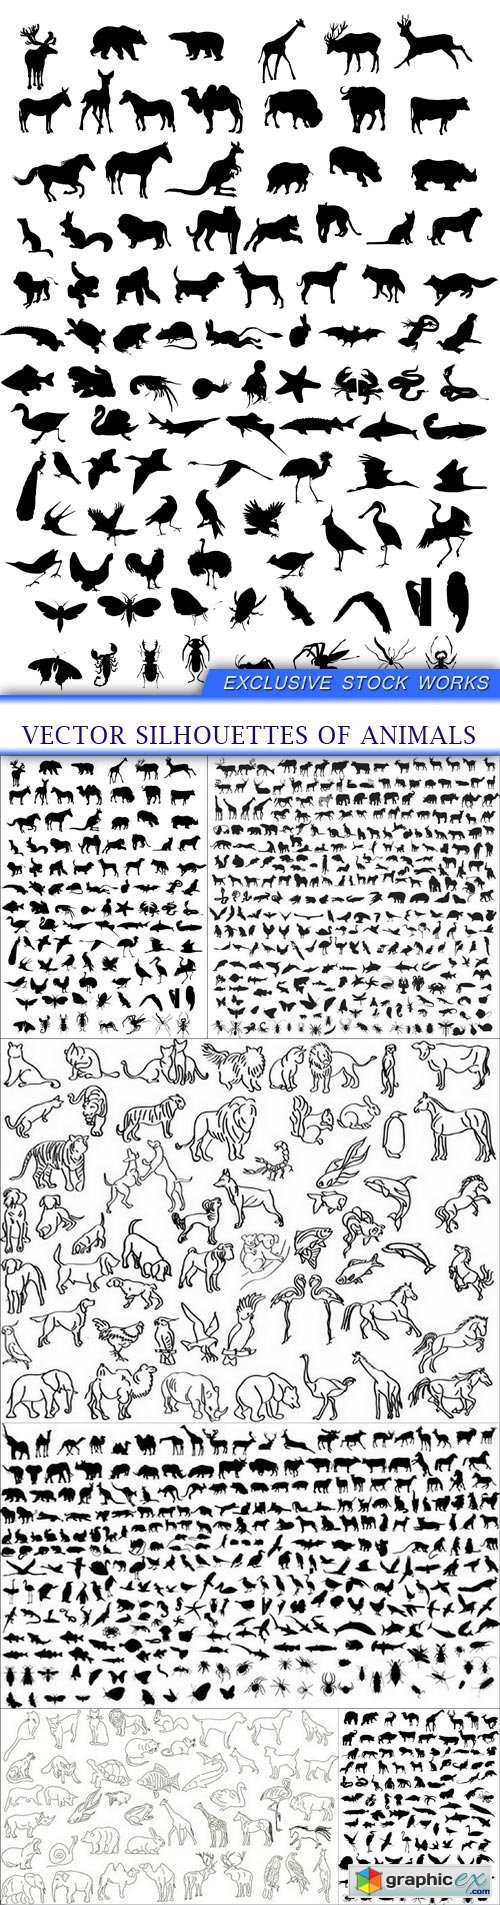 silhouettes of animals 6X EPS